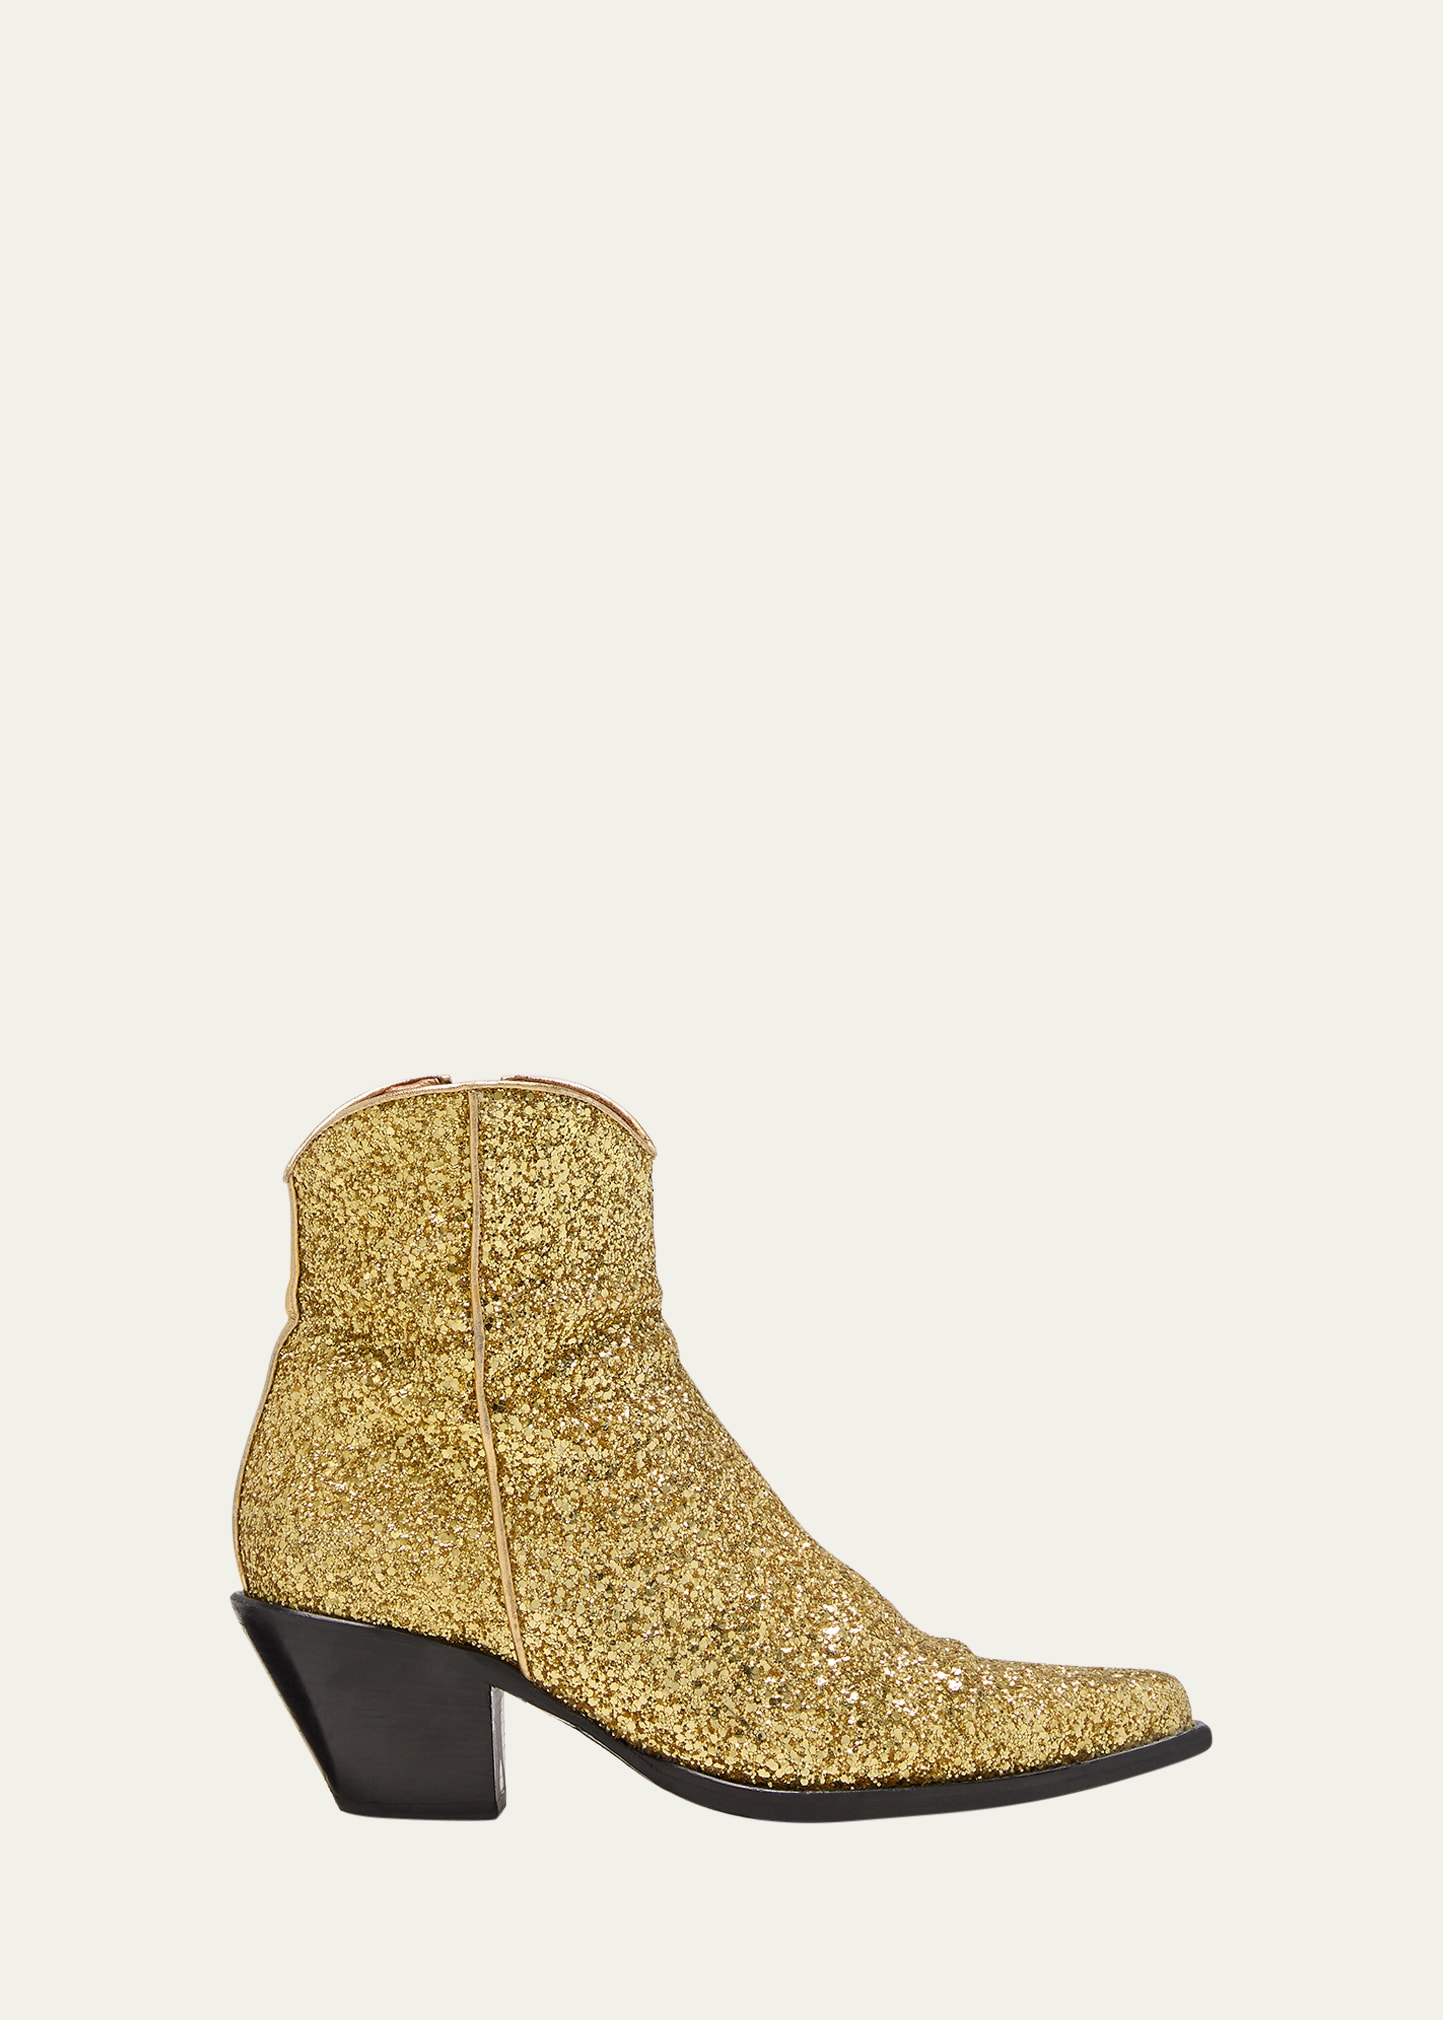 R13 Skinny Glitter Zip Cowboy Ankle Booties In Gold Sparkle